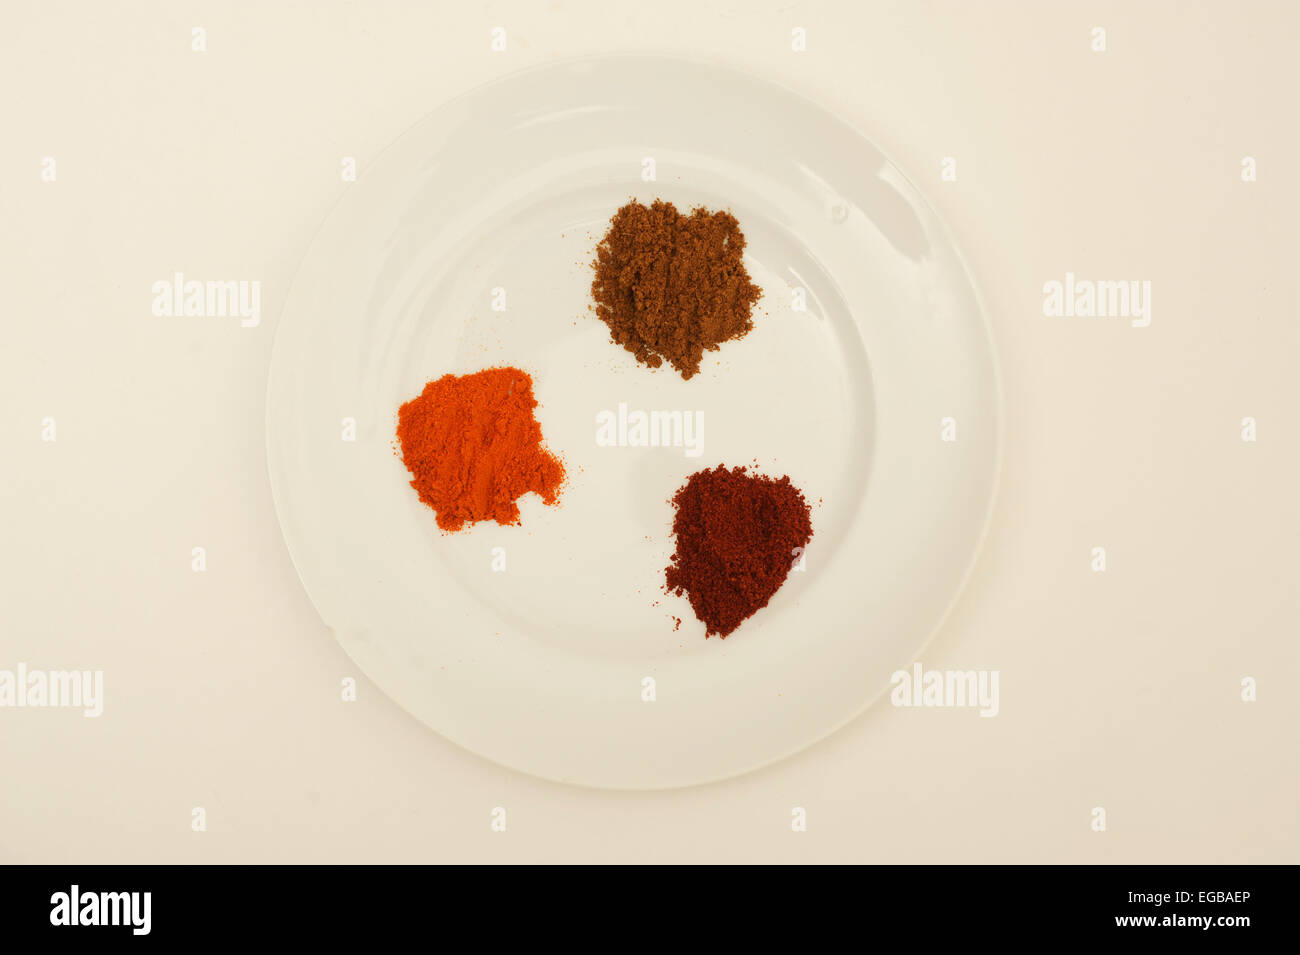 Plate of Asian Spices Stock Photo